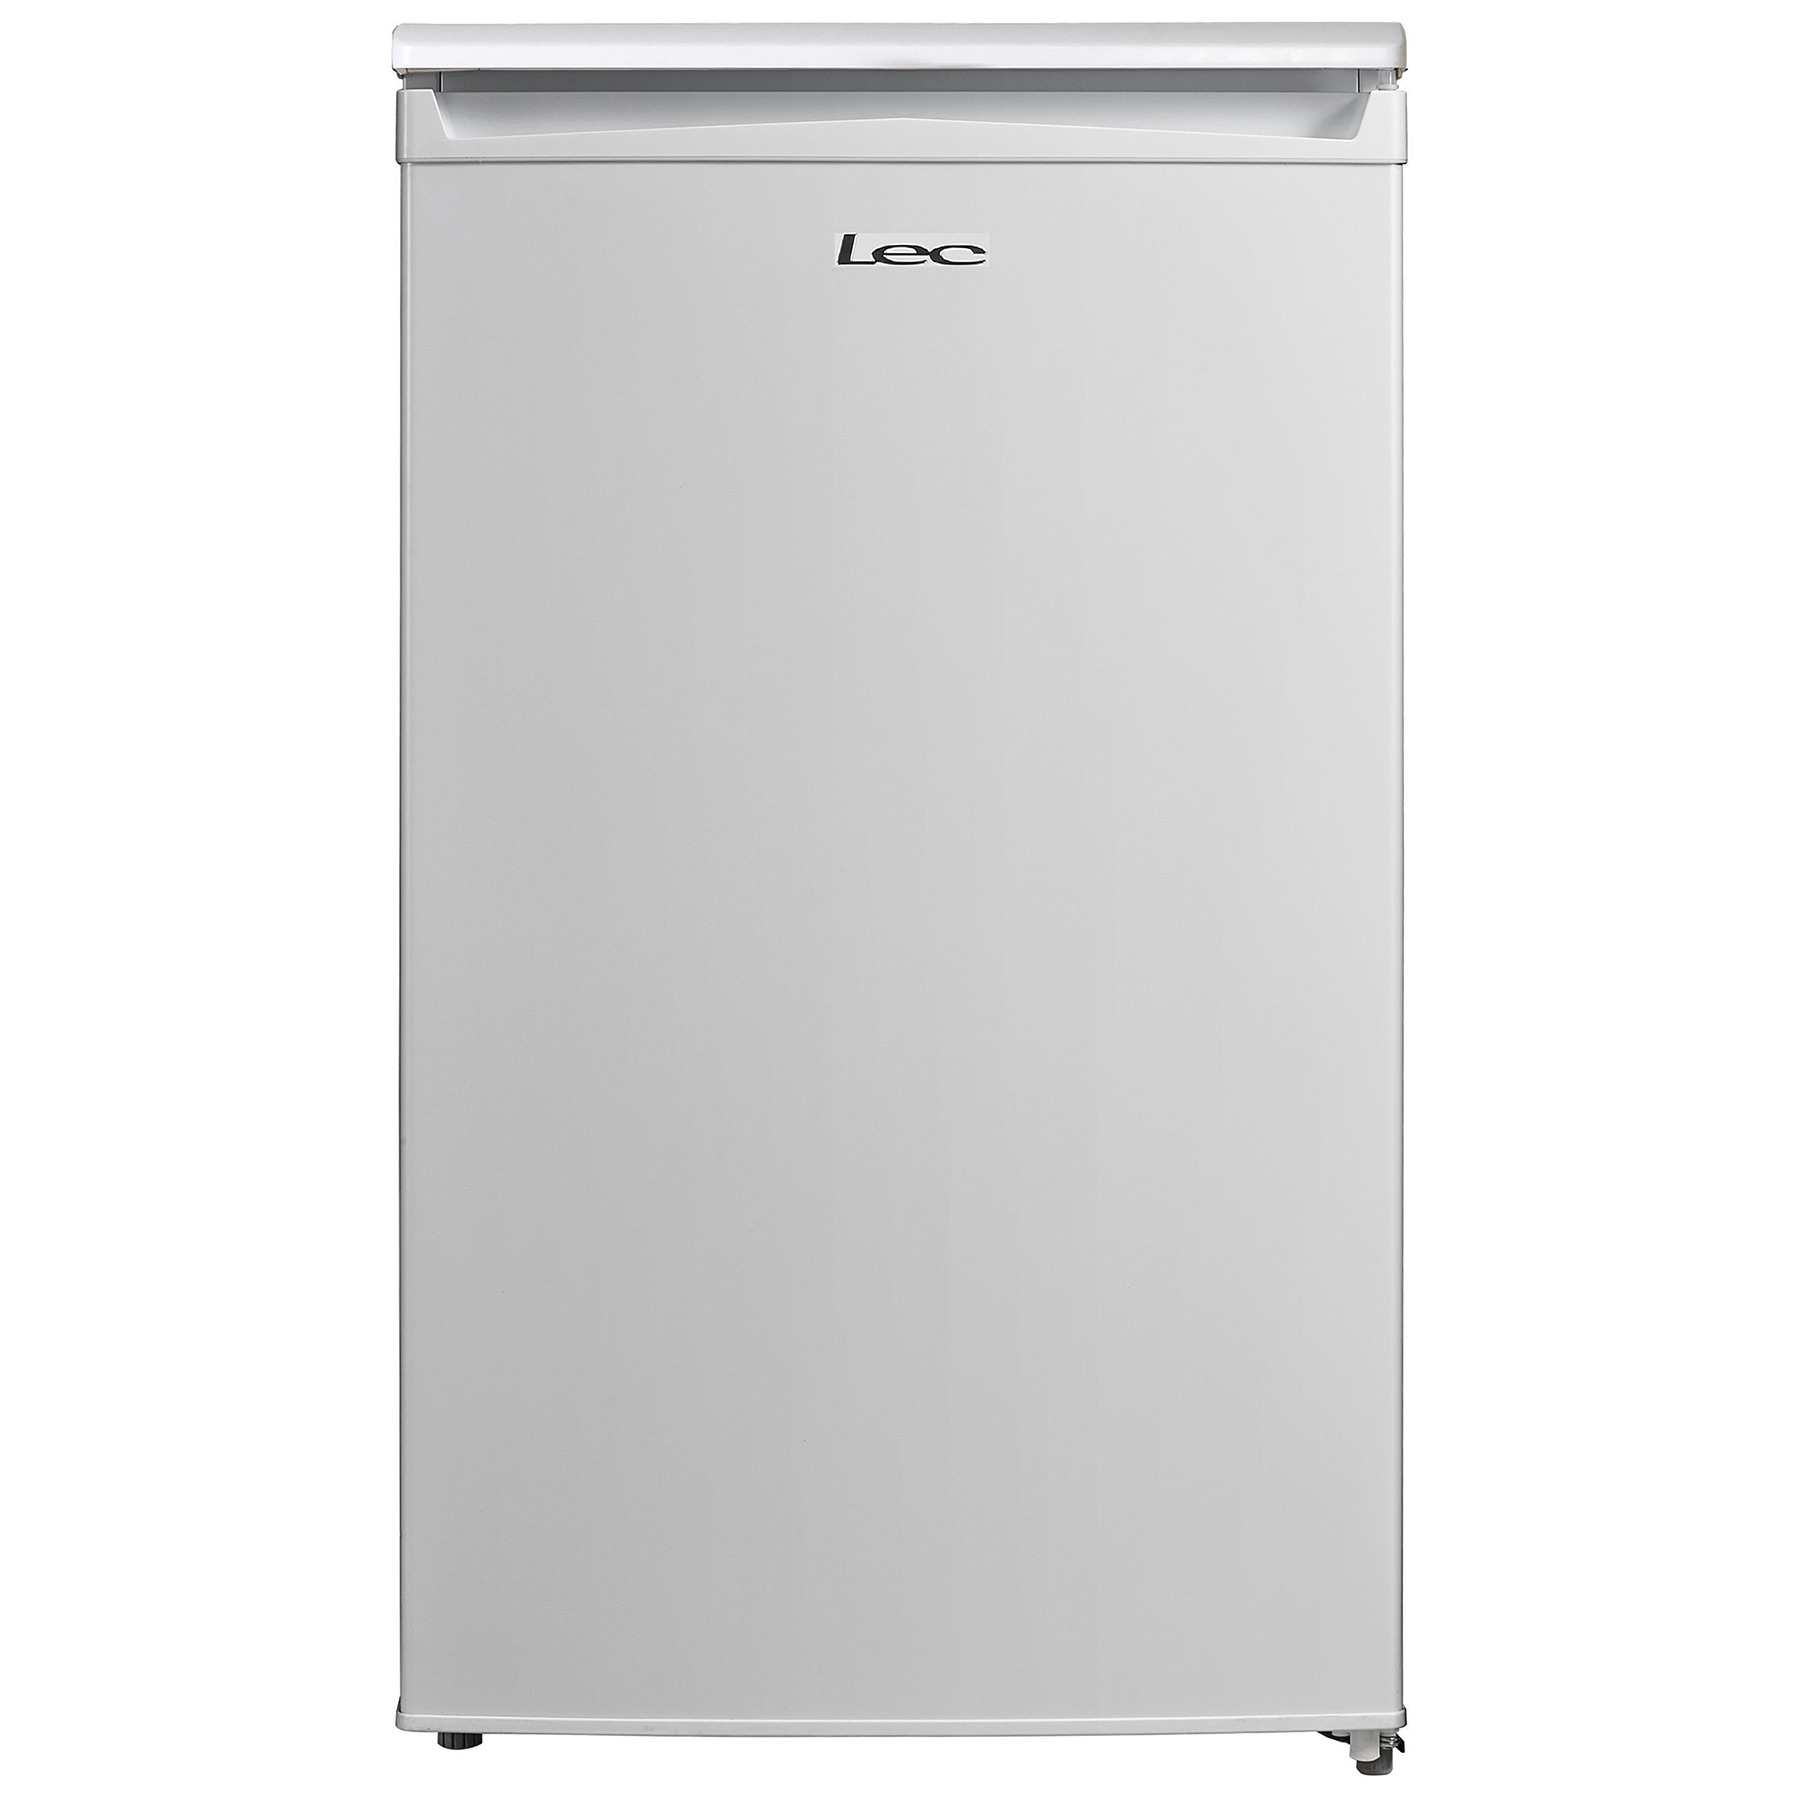 Image of LEC U5017W 50cm Undercounter Freezer in White F Rated 70L